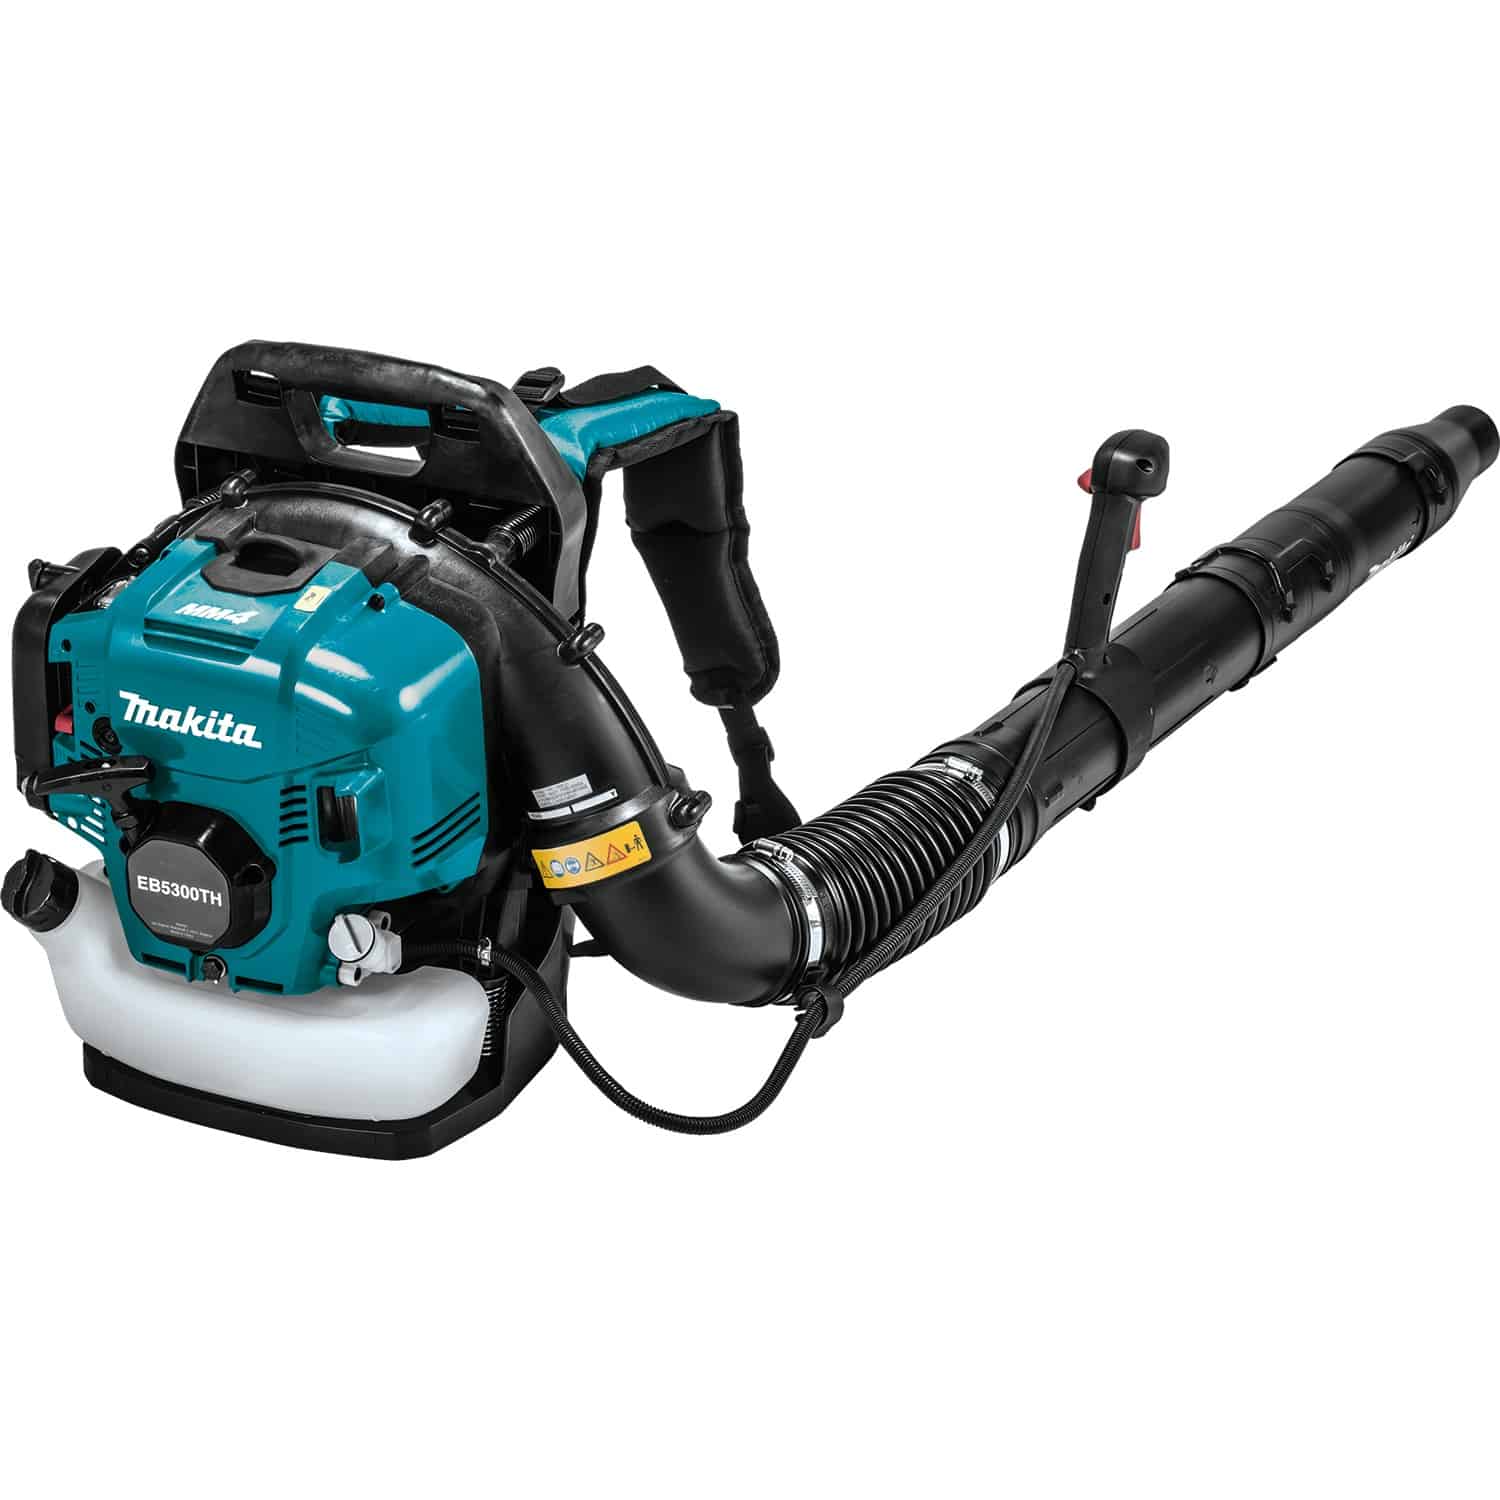 Best 4 cycle Leaf Blower Reviews (Updated 2020)